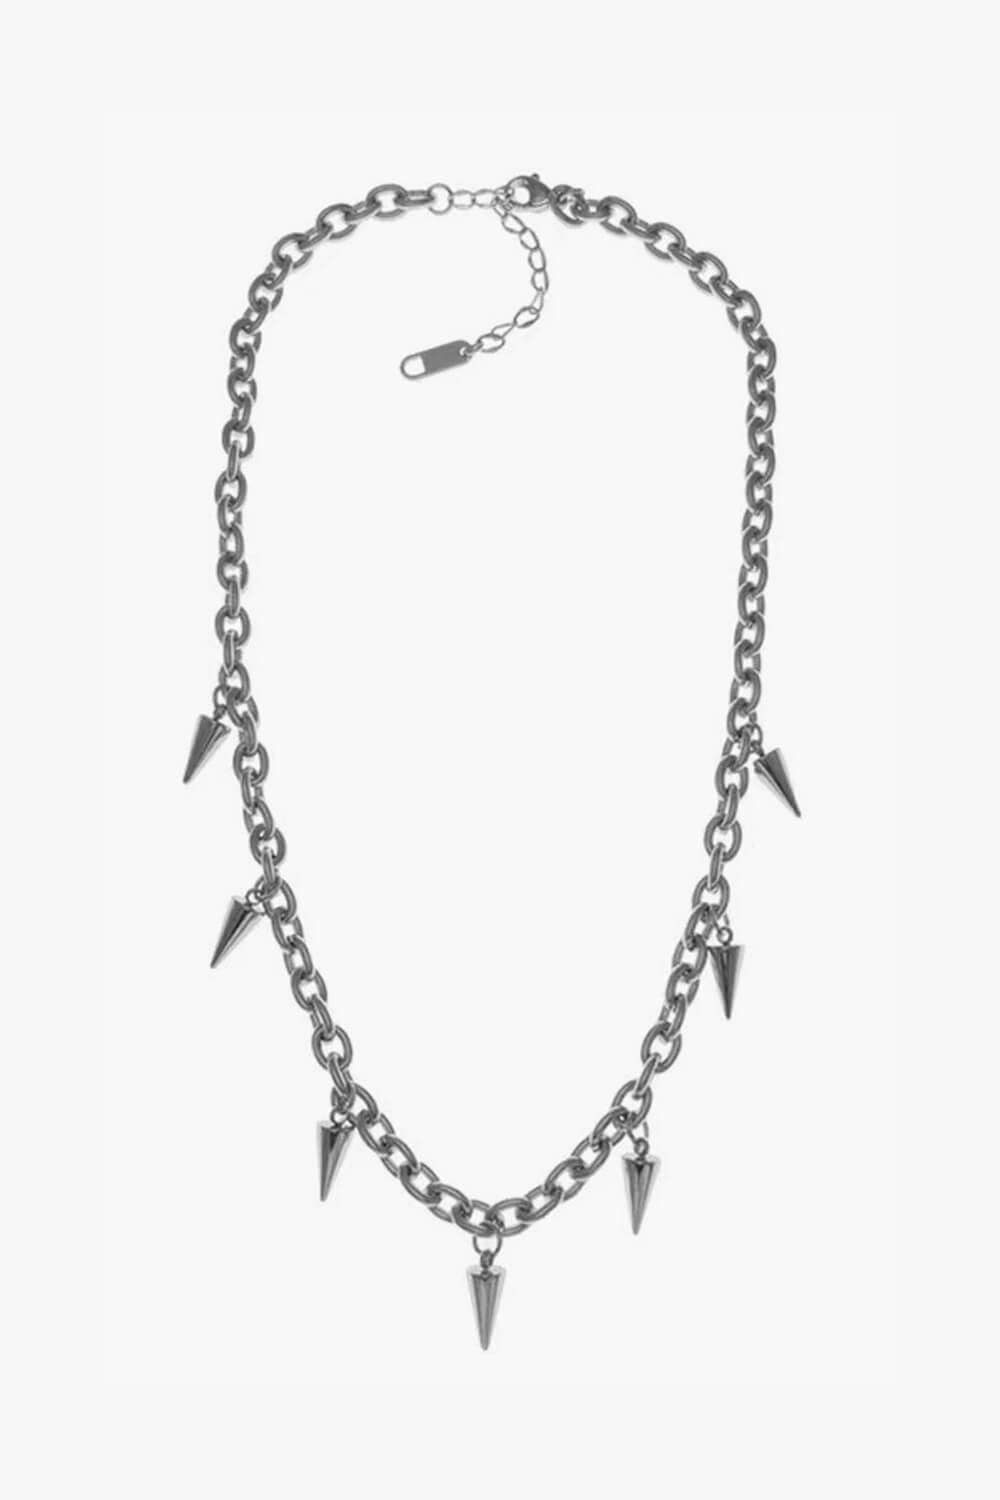 Hanging Spikes Grunge Chain Necklace